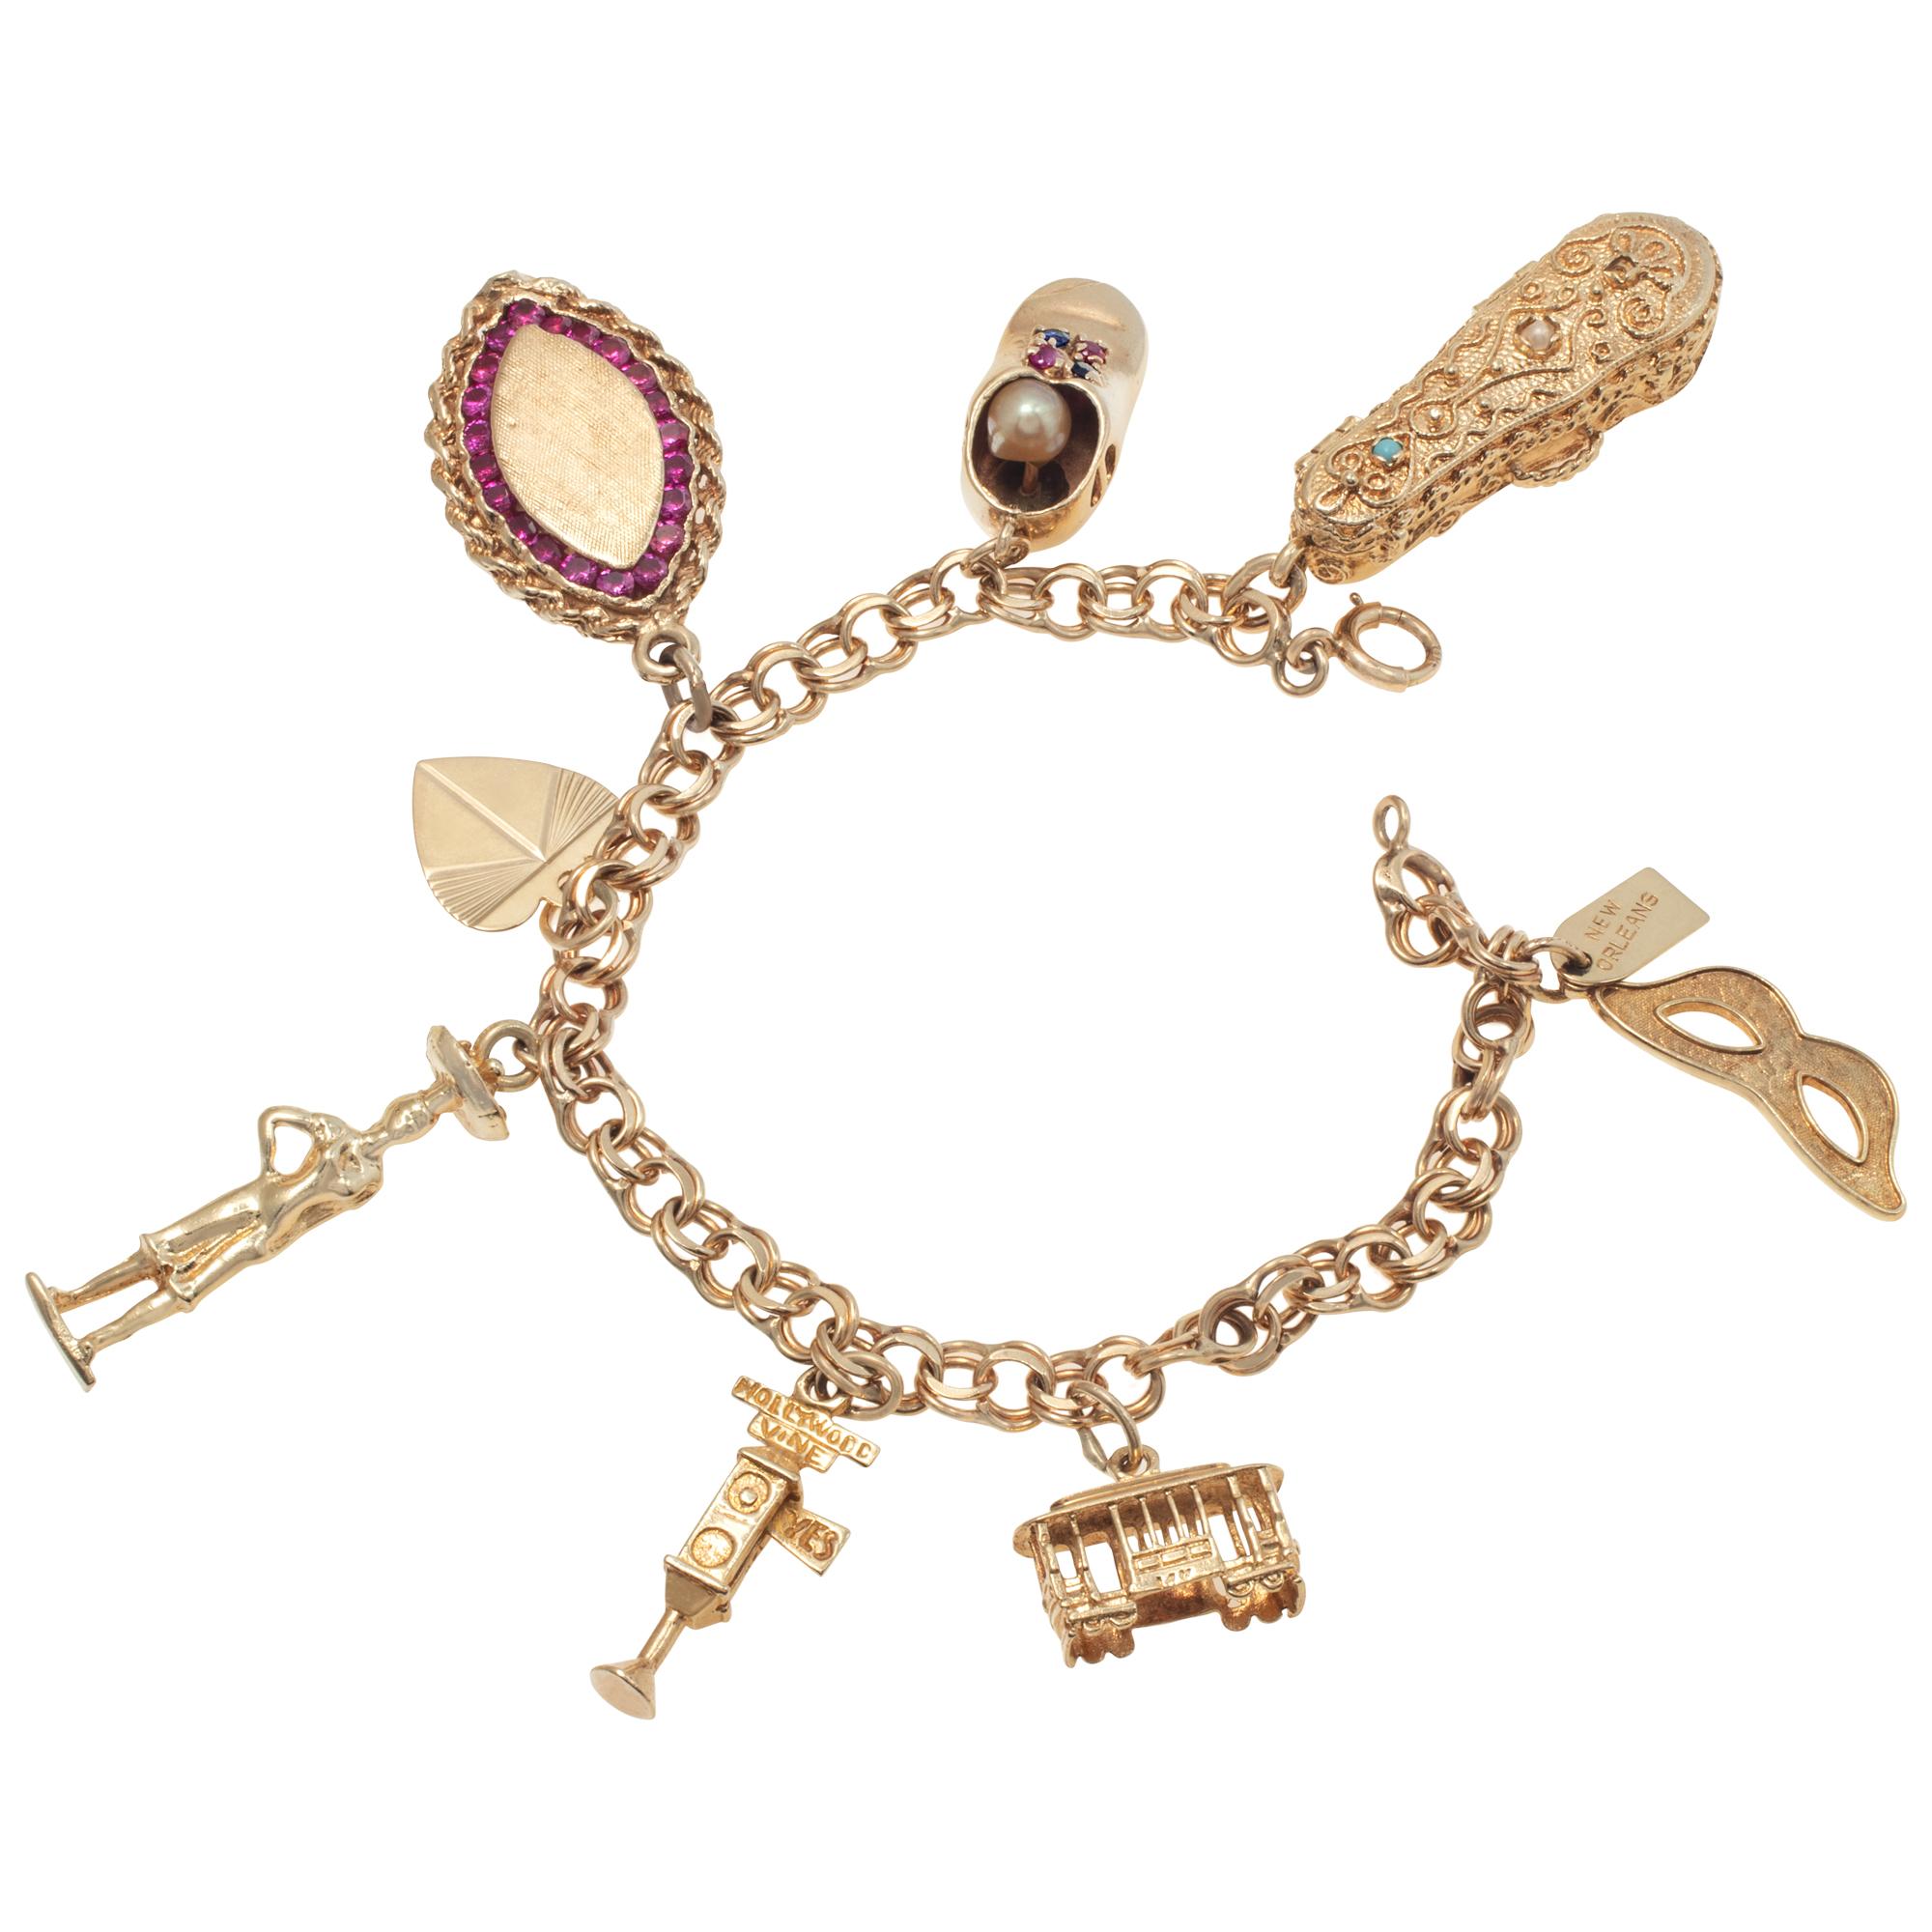 Yellow gold vintage charms bracelet with 8 unique vintage charms